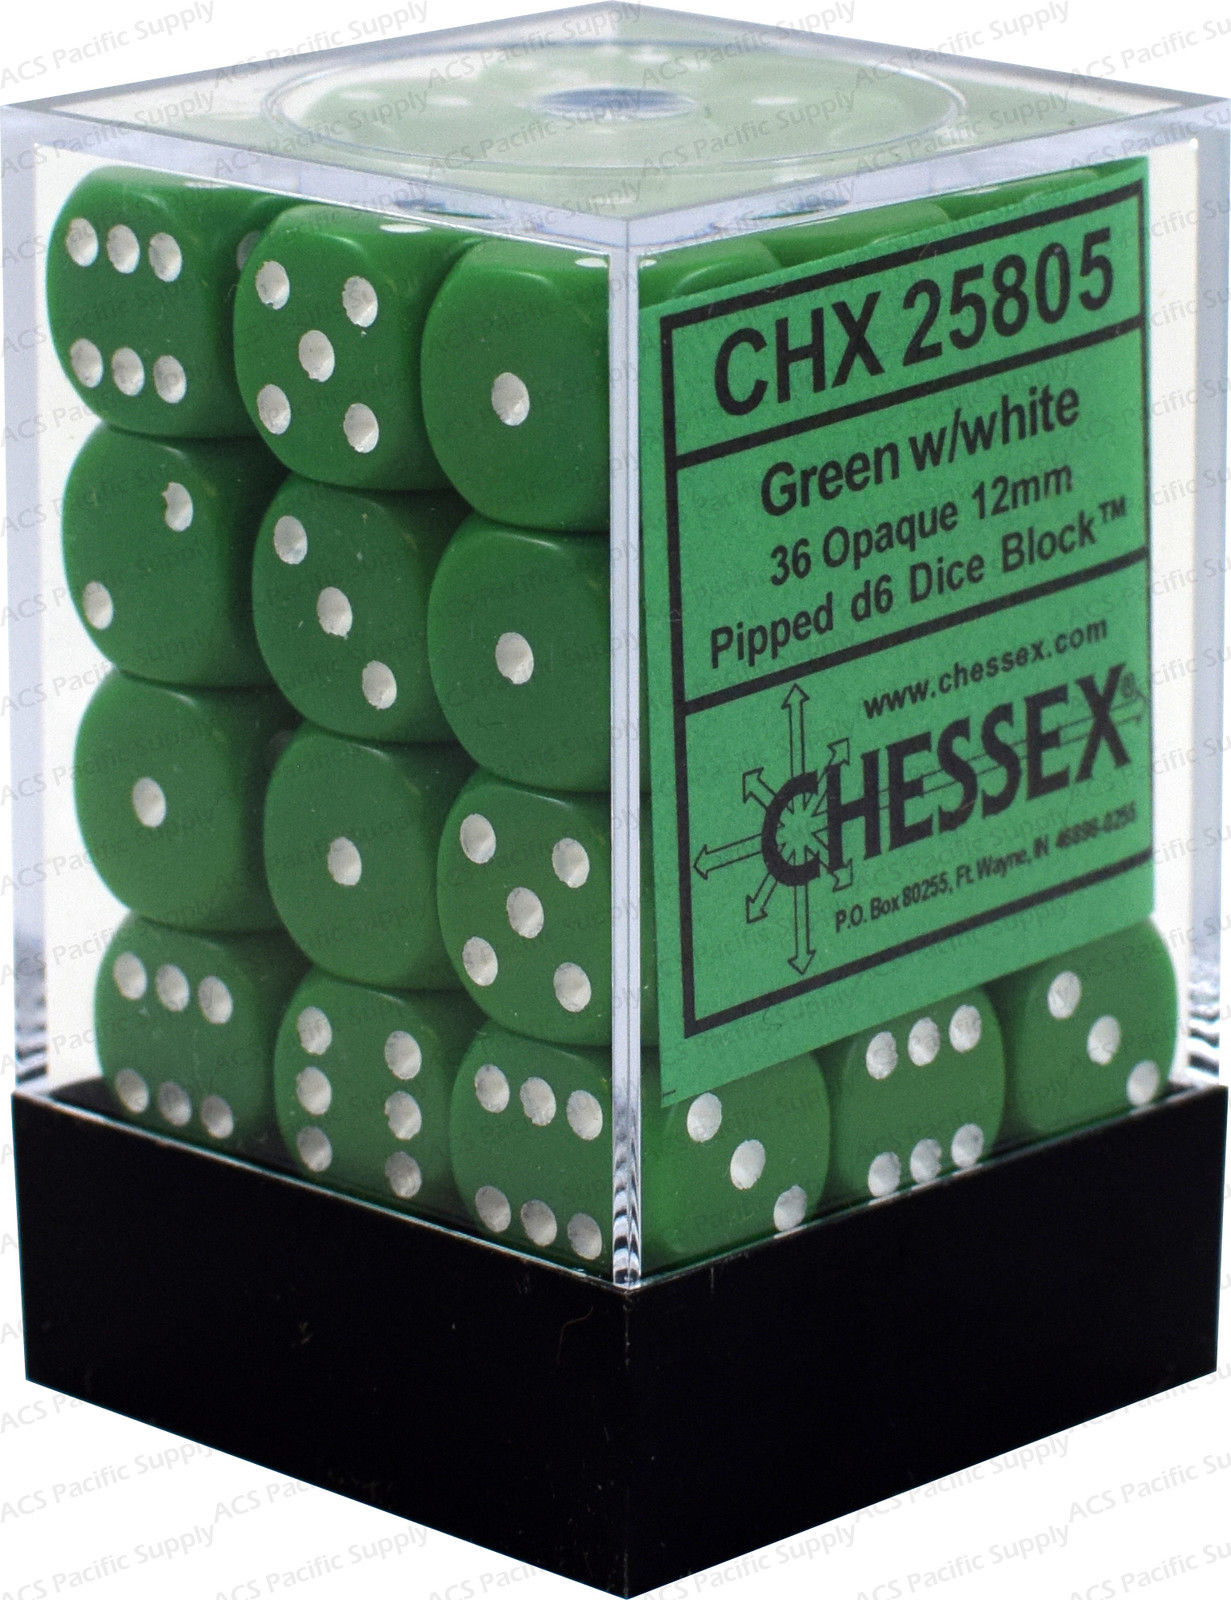 Chessex Opaque 36x 12mm Dice Green with White